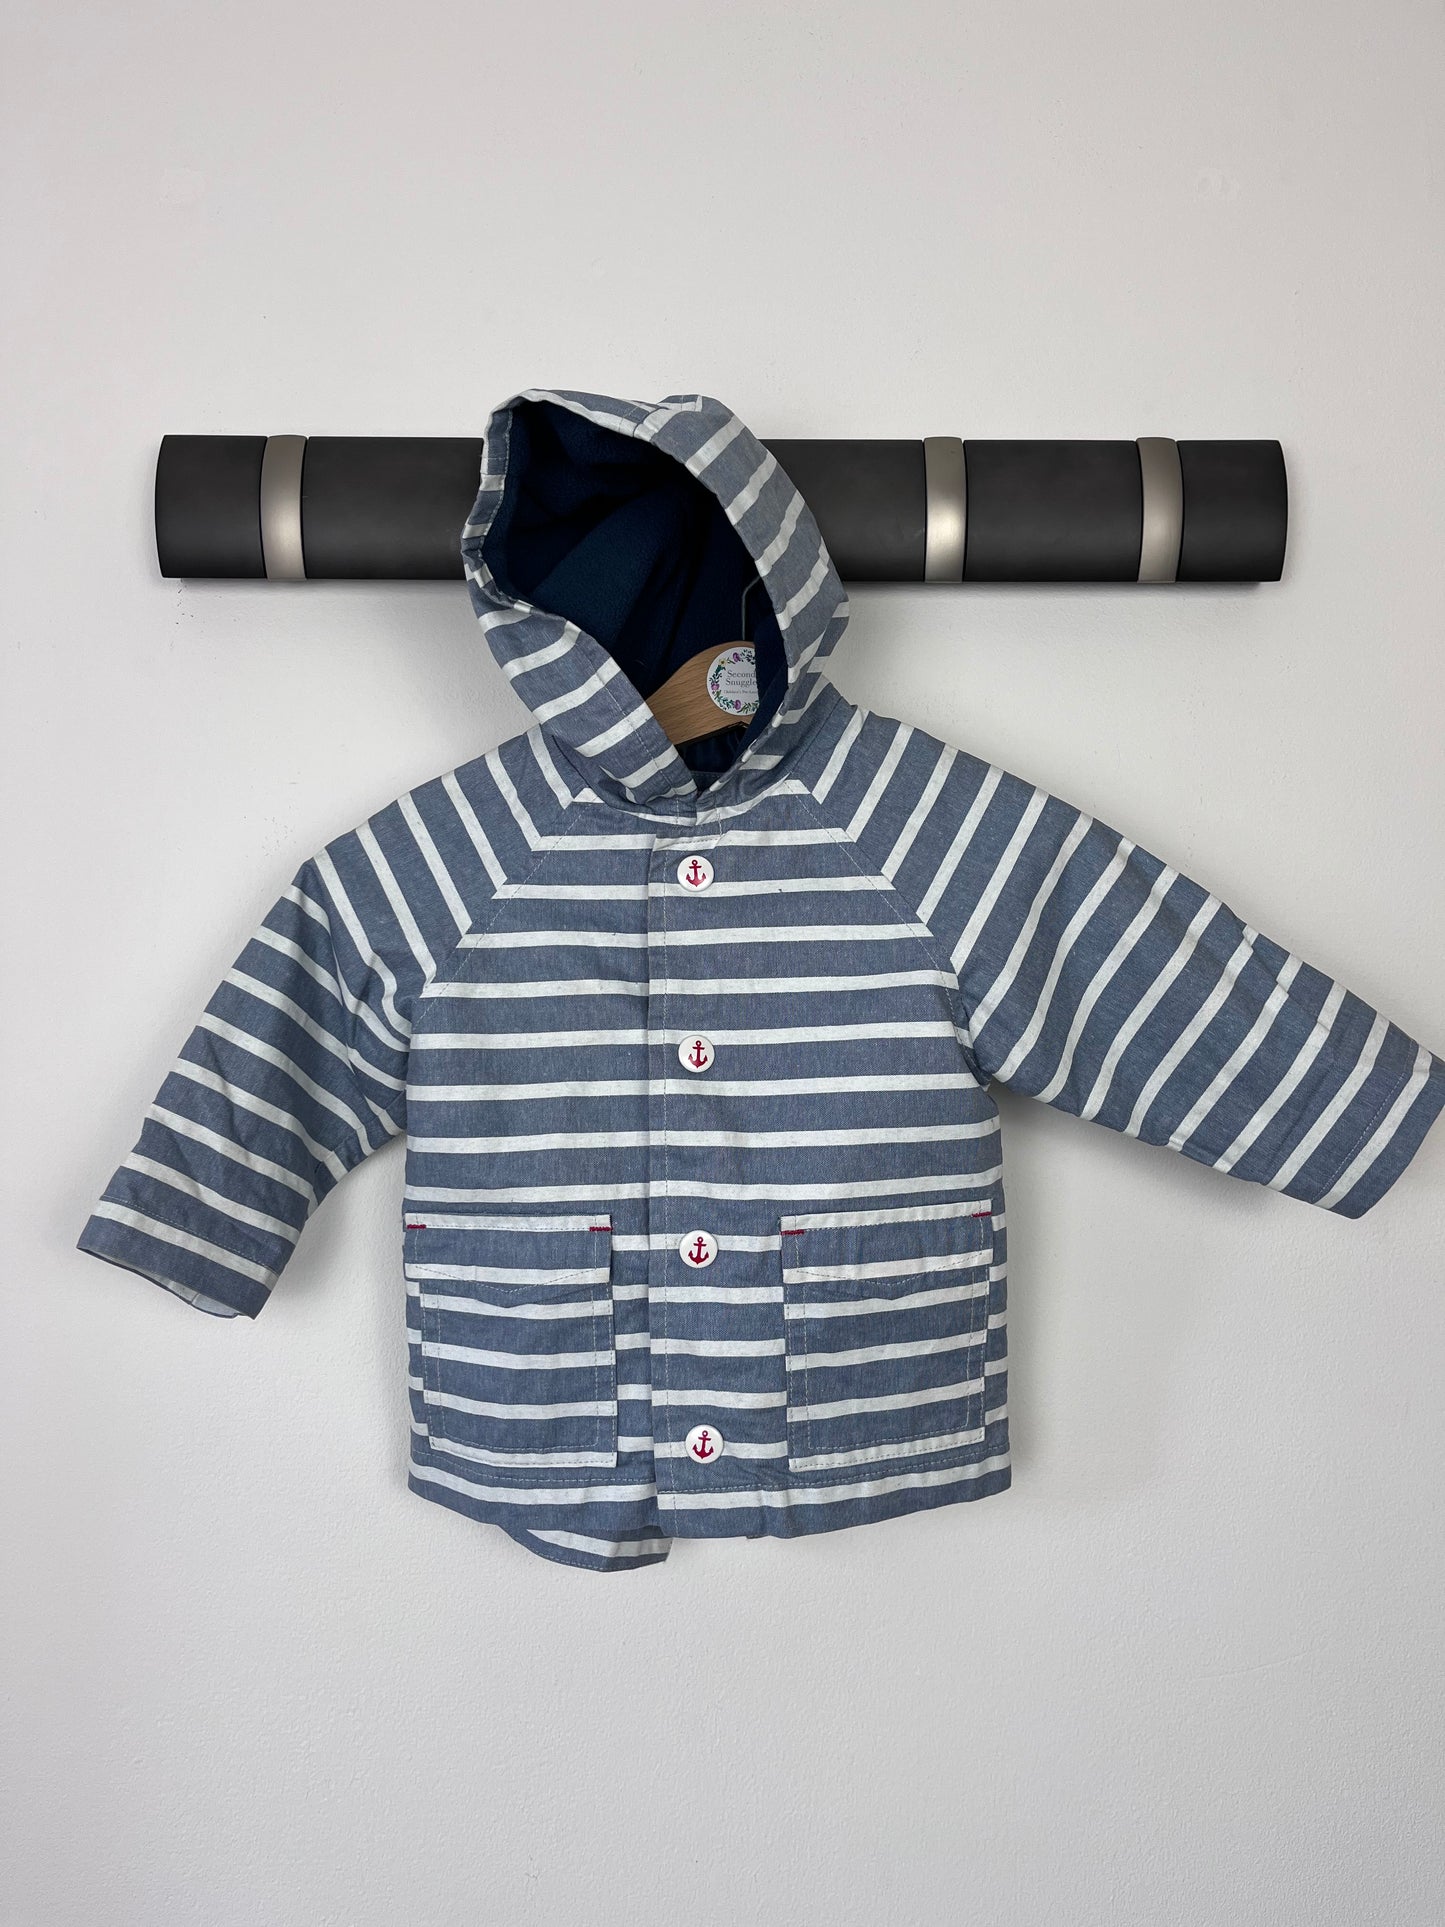 M&S 3-6 Months-Coats-Second Snuggle Preloved